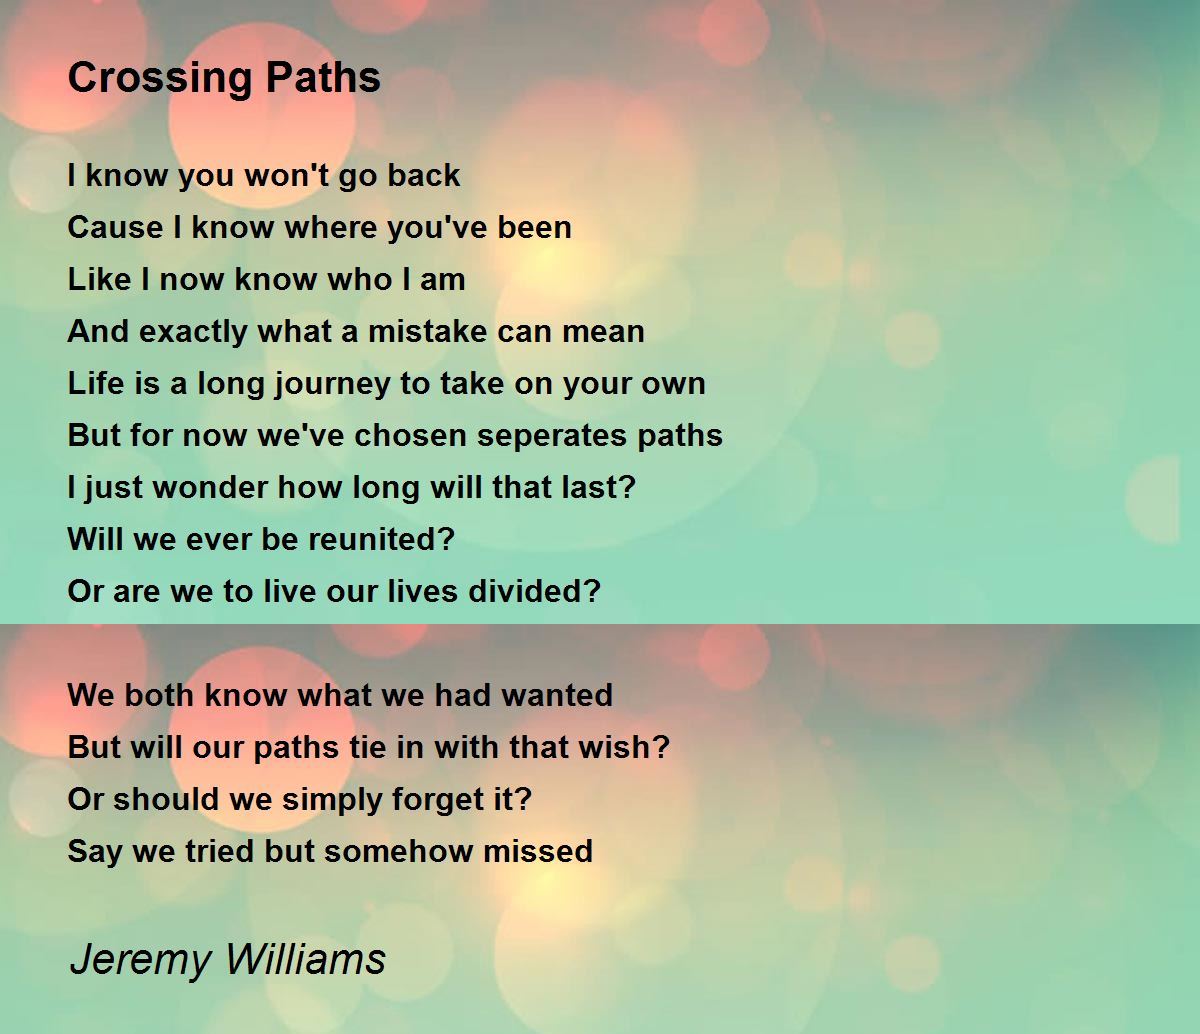 Crossing Paths Crossing Paths Poem By Jeremy Williams